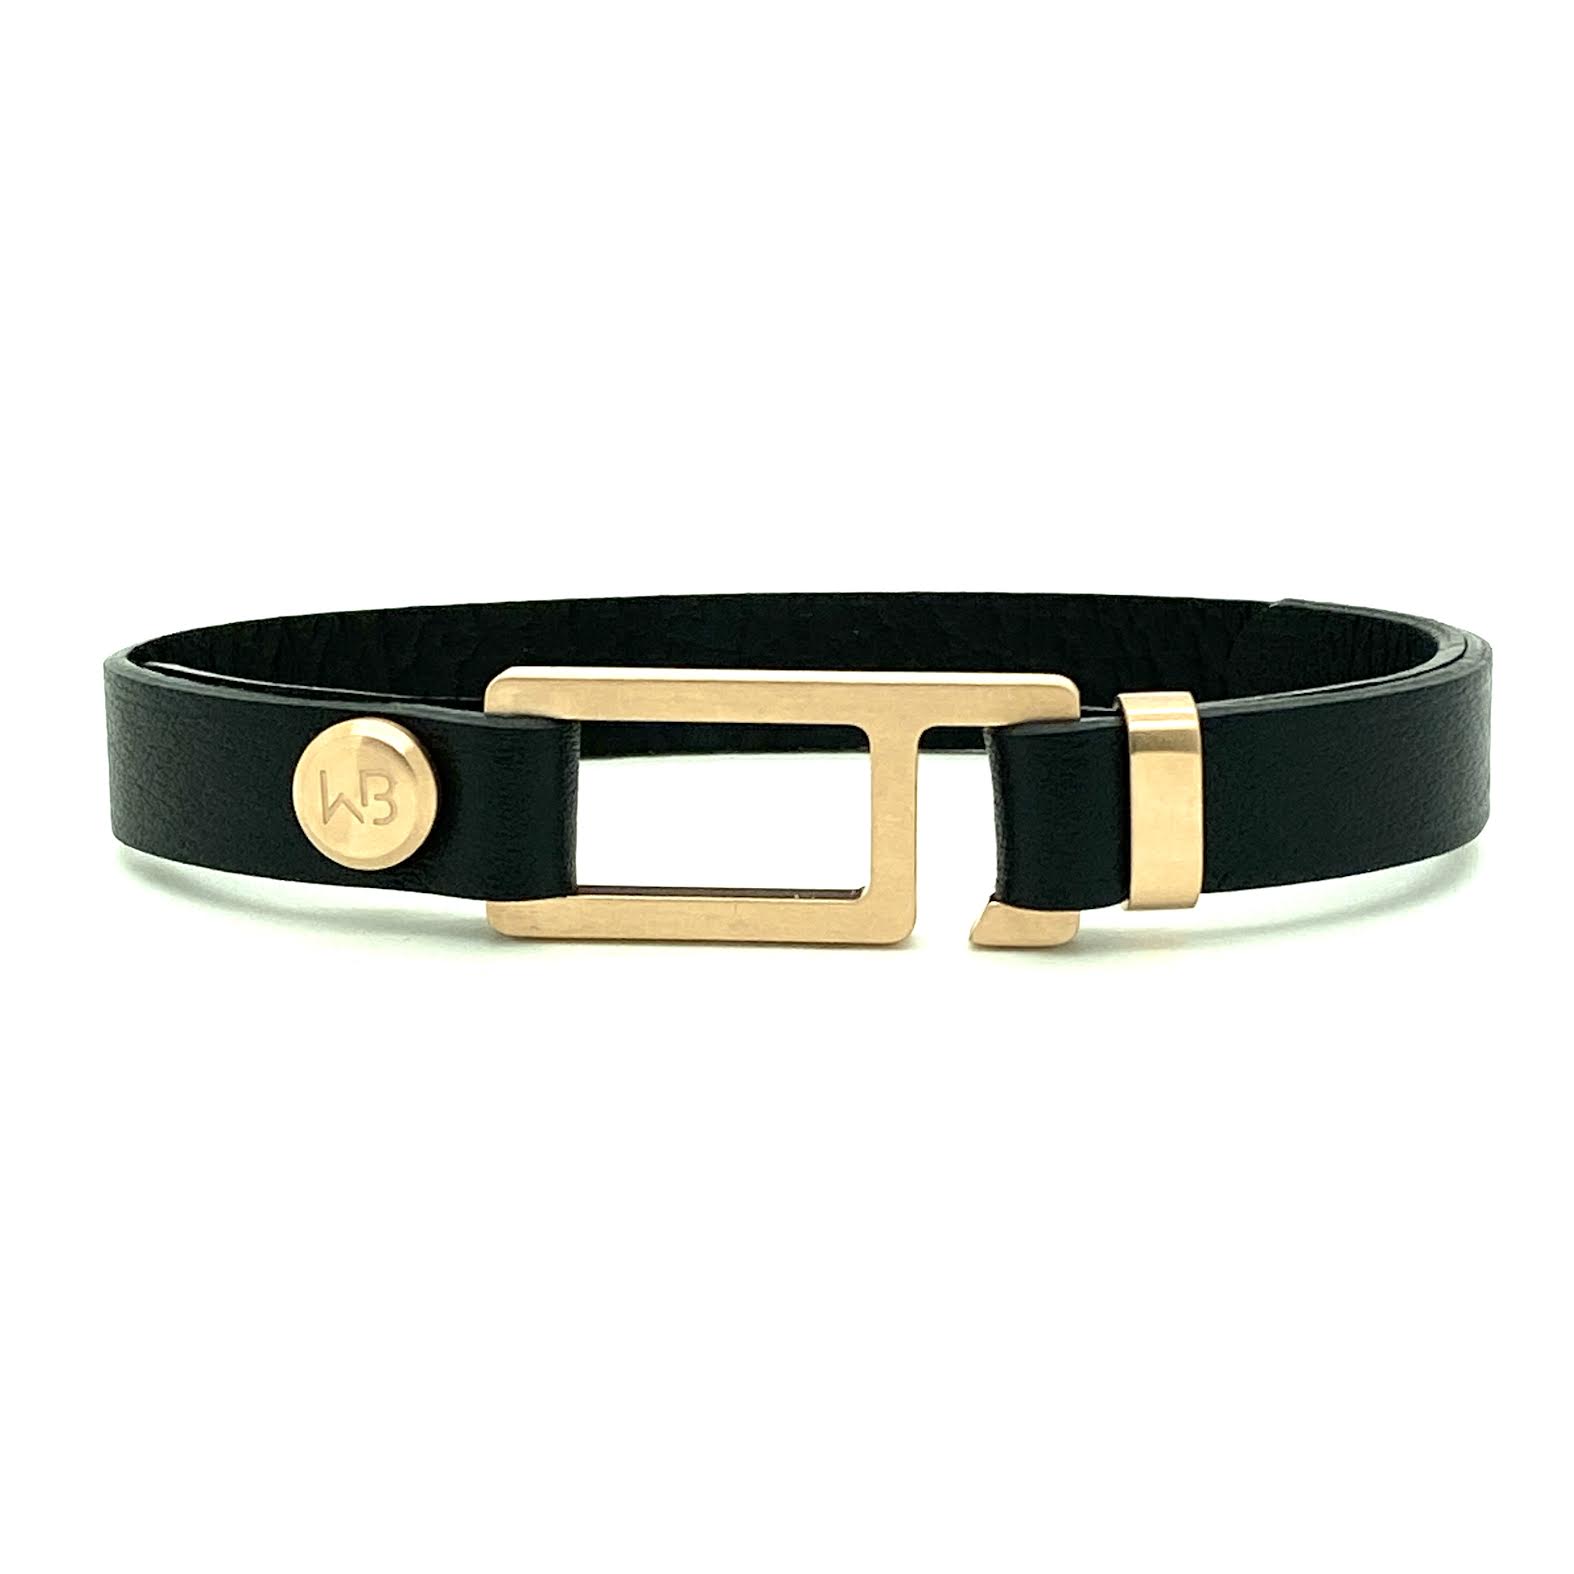 Our striking black Italian leather bracelet is paired perfectly with our artisan designed, lightly brushed hardware. Your hardware choices include Rose Gold, Yellow Gold, Stainless Steel or Black Ceramic. This adjustable size bracelet is a distinctive piece worn alone or with a WristBend stacking bracelet. Made by WristBend